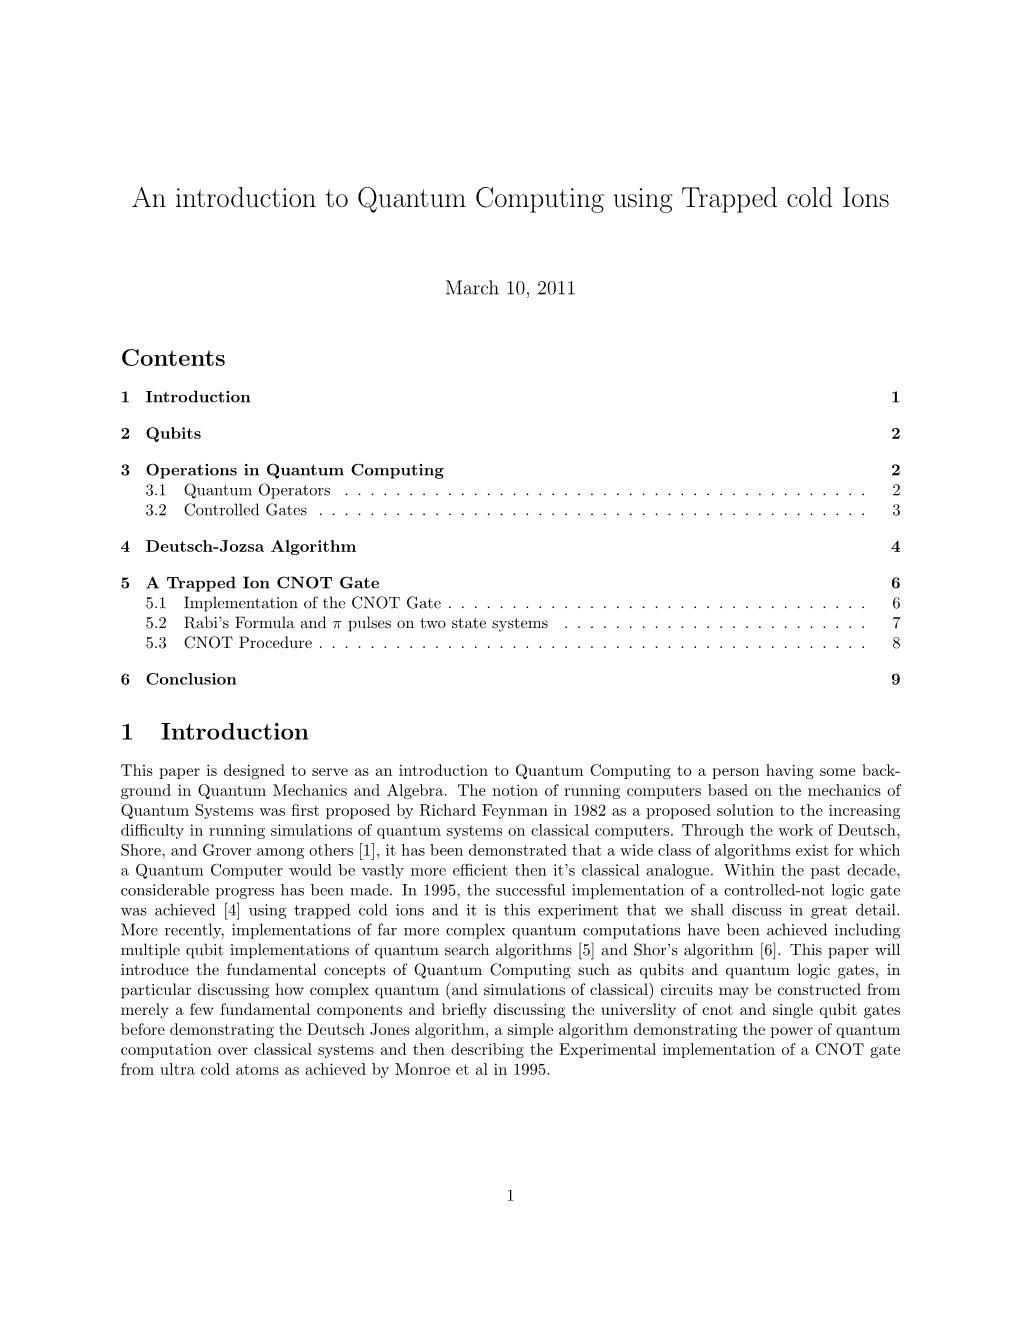 An Introduction to Quantum Computing Using Trapped Cold Ions